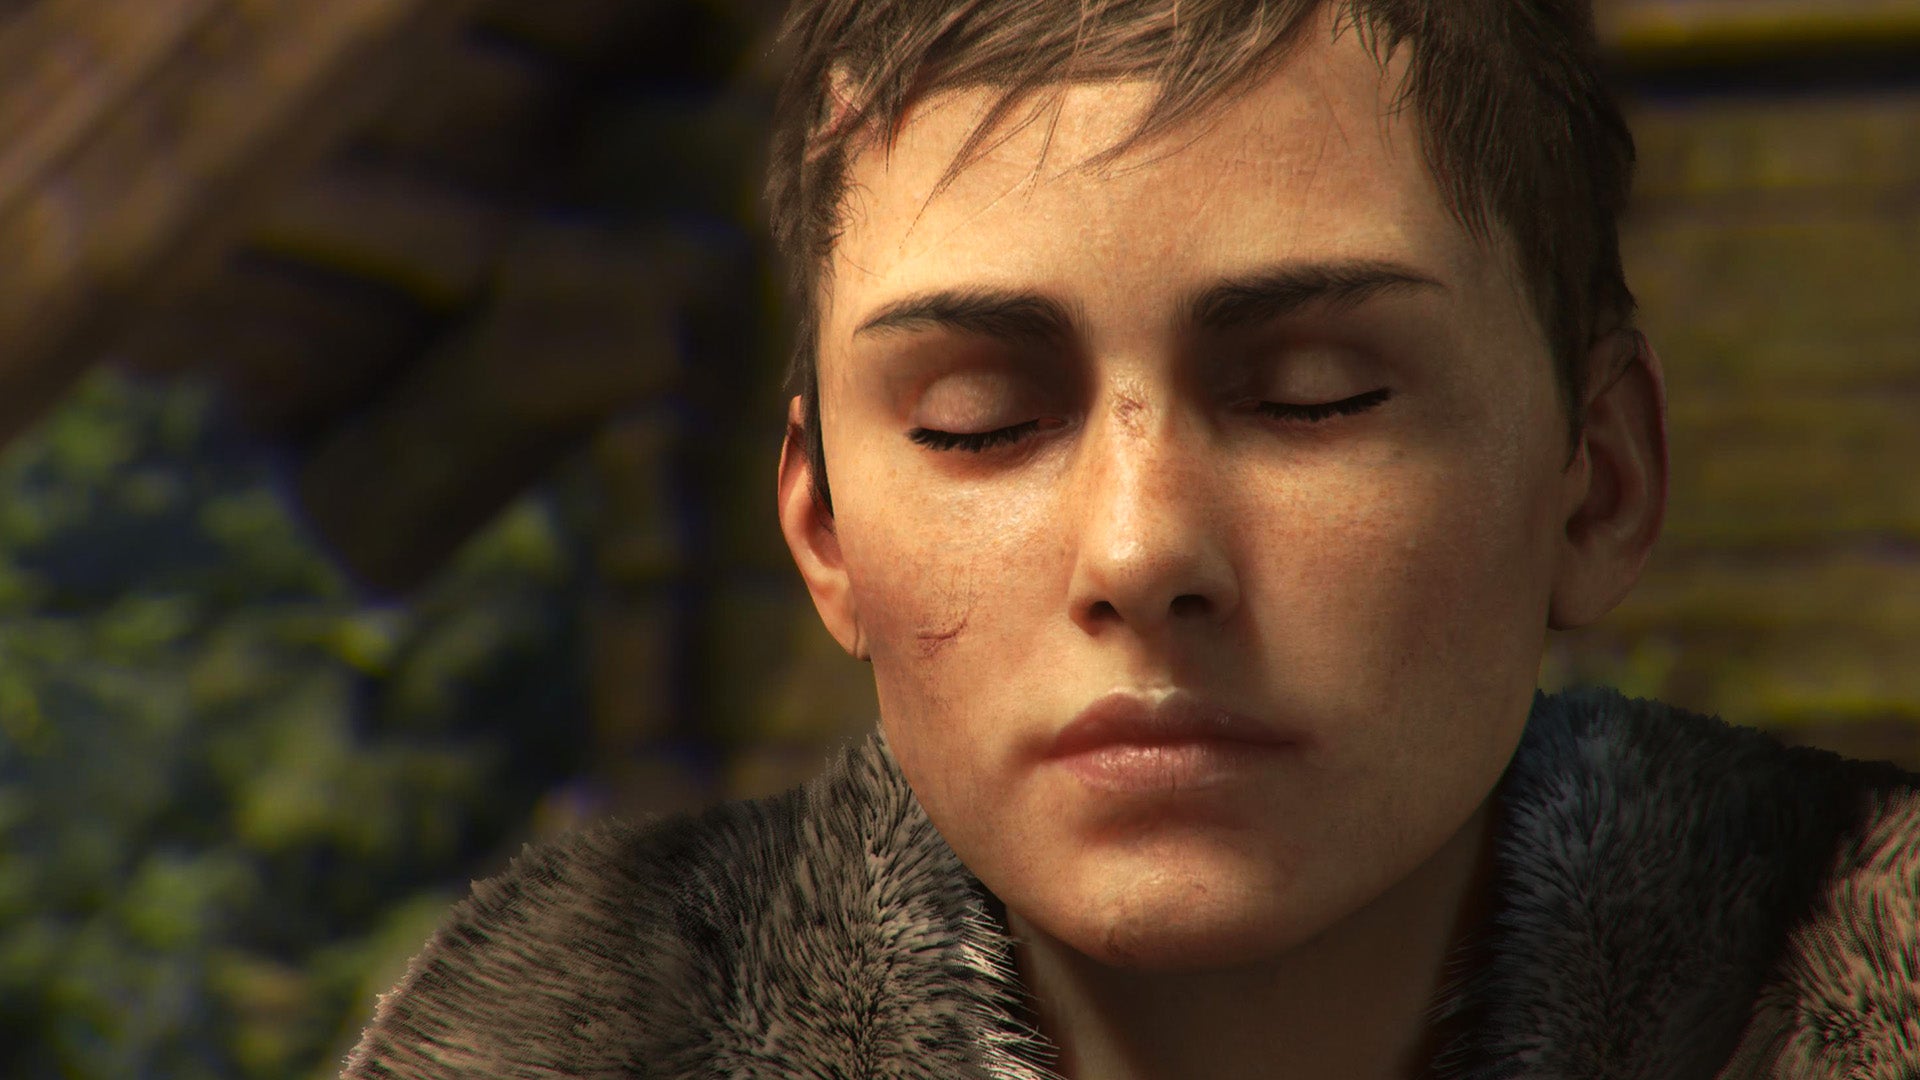 A portrait of A Plague Tale heroine Amicia, at the end of Requiem, eyes closed, serene, contemplating, as golden afternoon sunshine warms one side of her face.